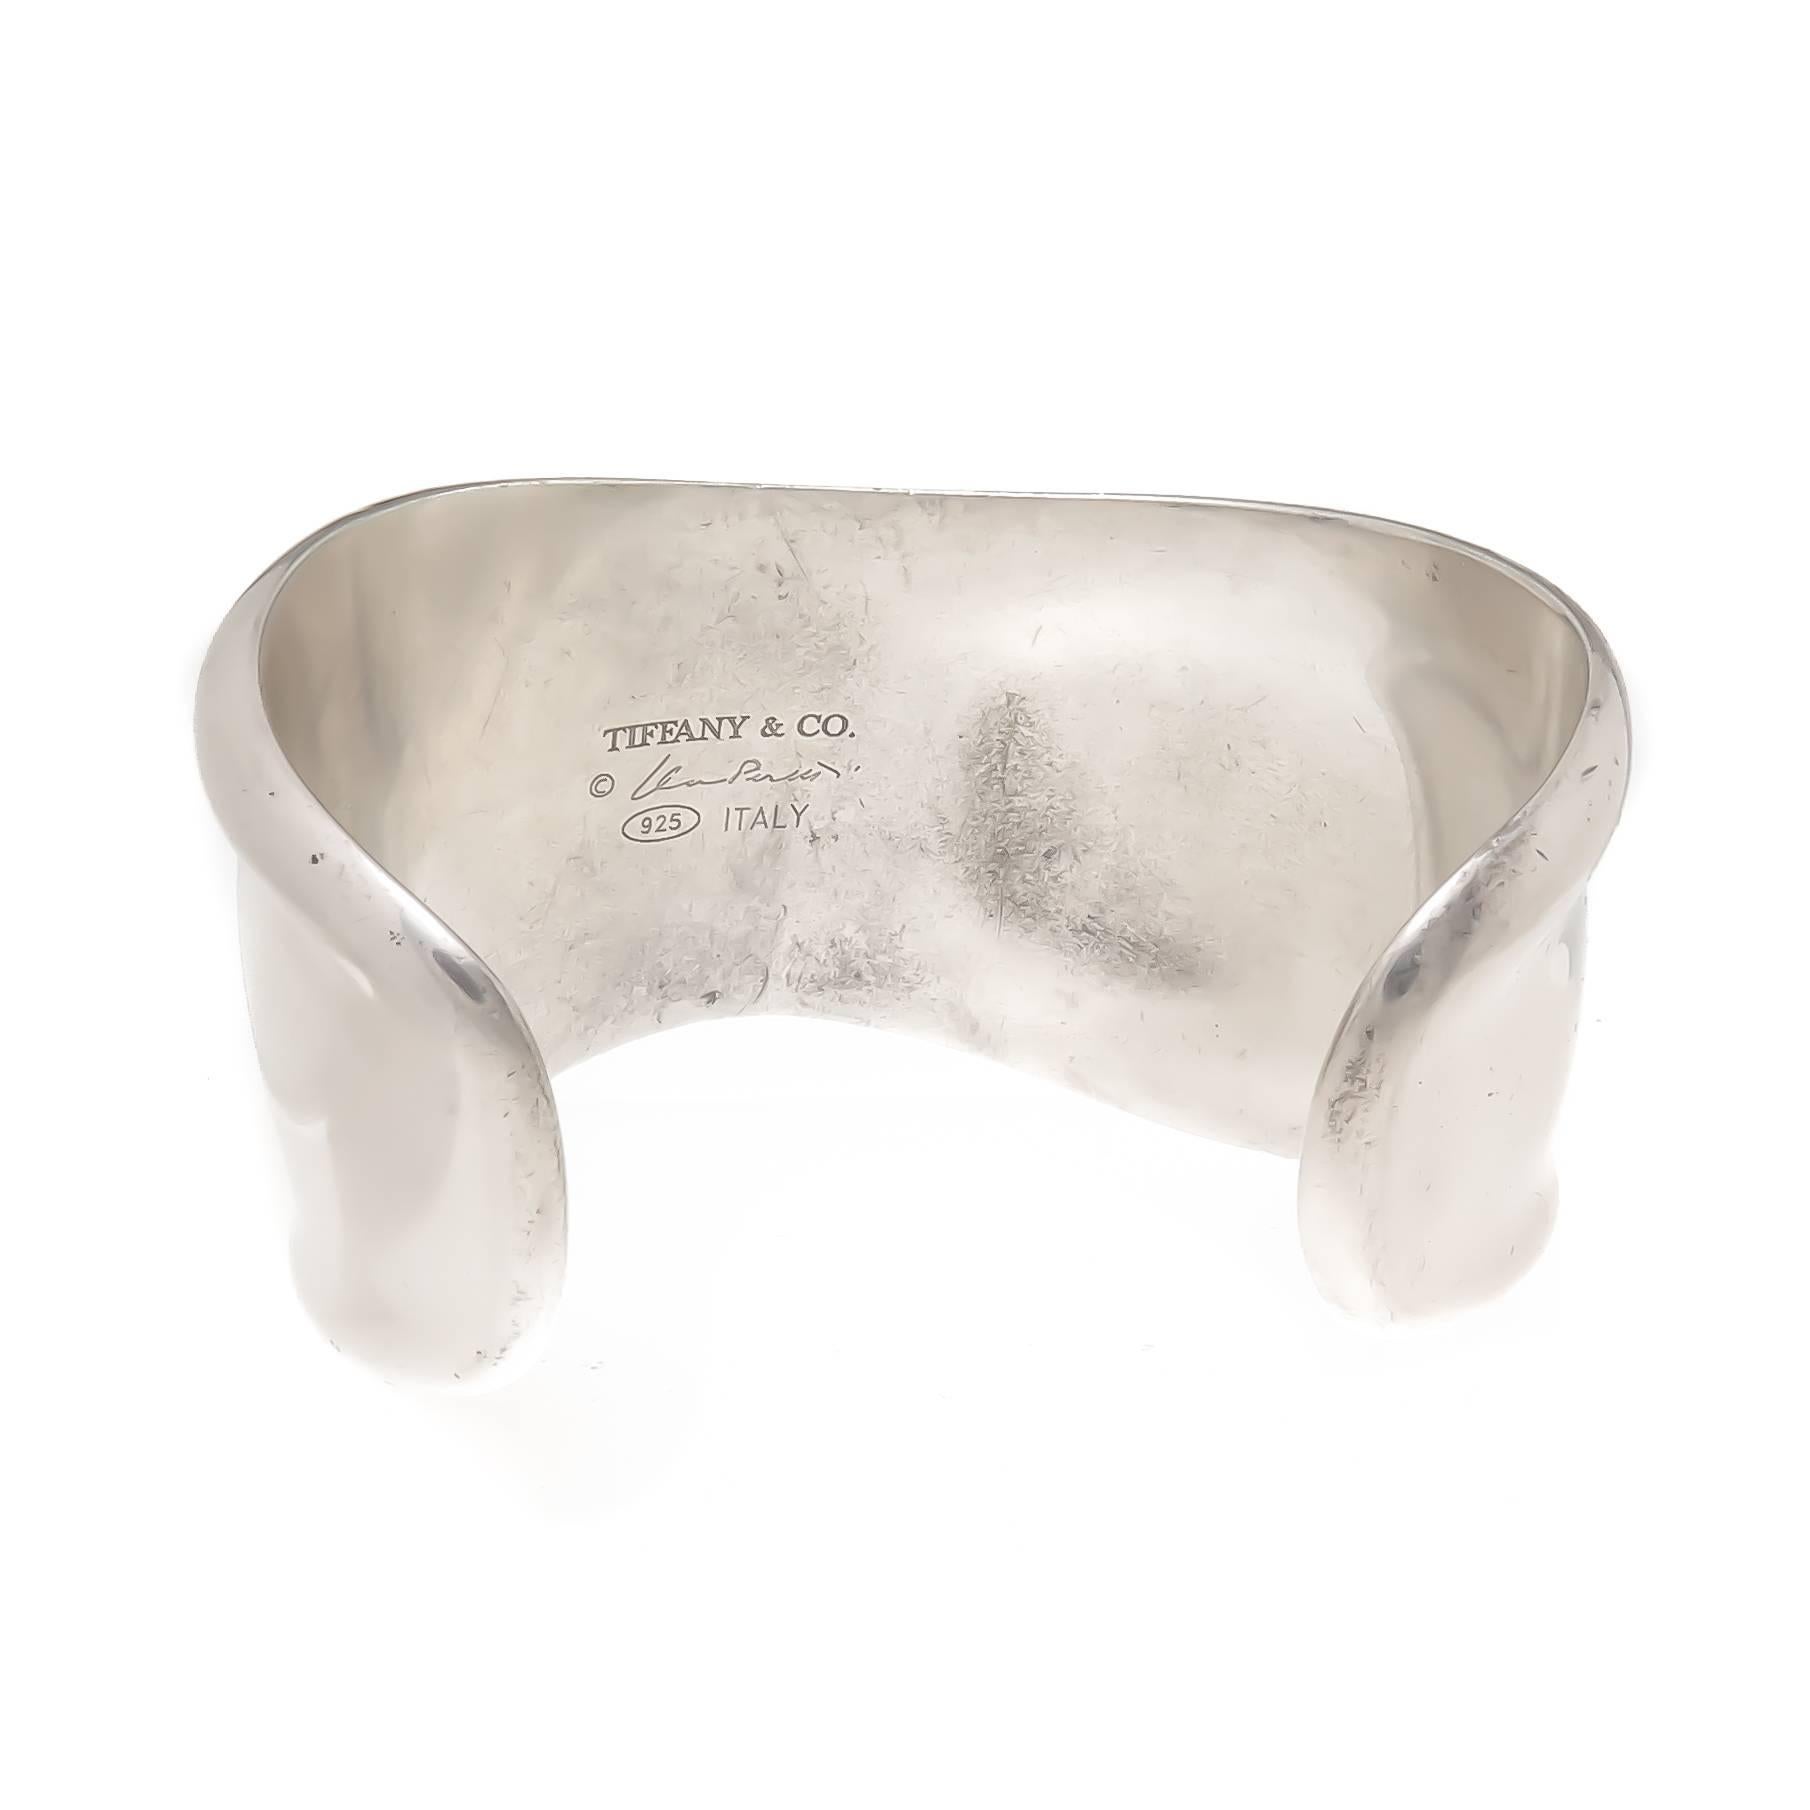 Circa 2000 Elsa Peretti for Tiffany & Co., Sterling Silver Bone Cuff Bracelet. Measuring 1 1/2 inch at its widest point, an opening of 1 1/8 inch and an inside measurement of approximately 6 1/8 inch. 